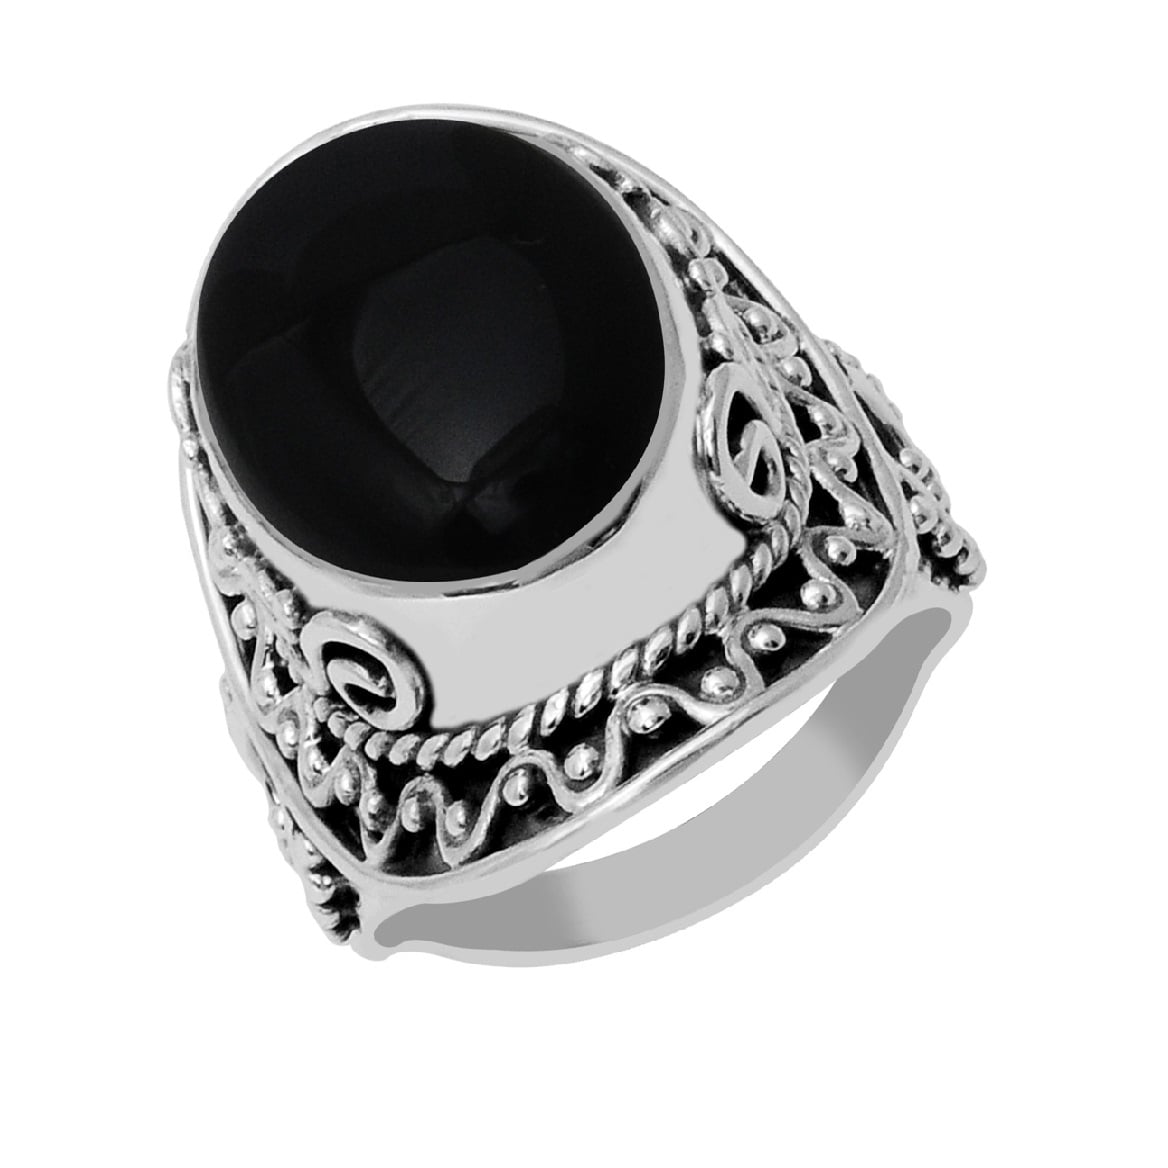 An Elegant and December Birthstone Fine Fashion Ring made in as A Beautiful Thanks Giving and Christmas Gift Ideas Orchid Jewelry 6 Ctw Natural Oval Black onyx 925 Sterling Silver Rings for Women